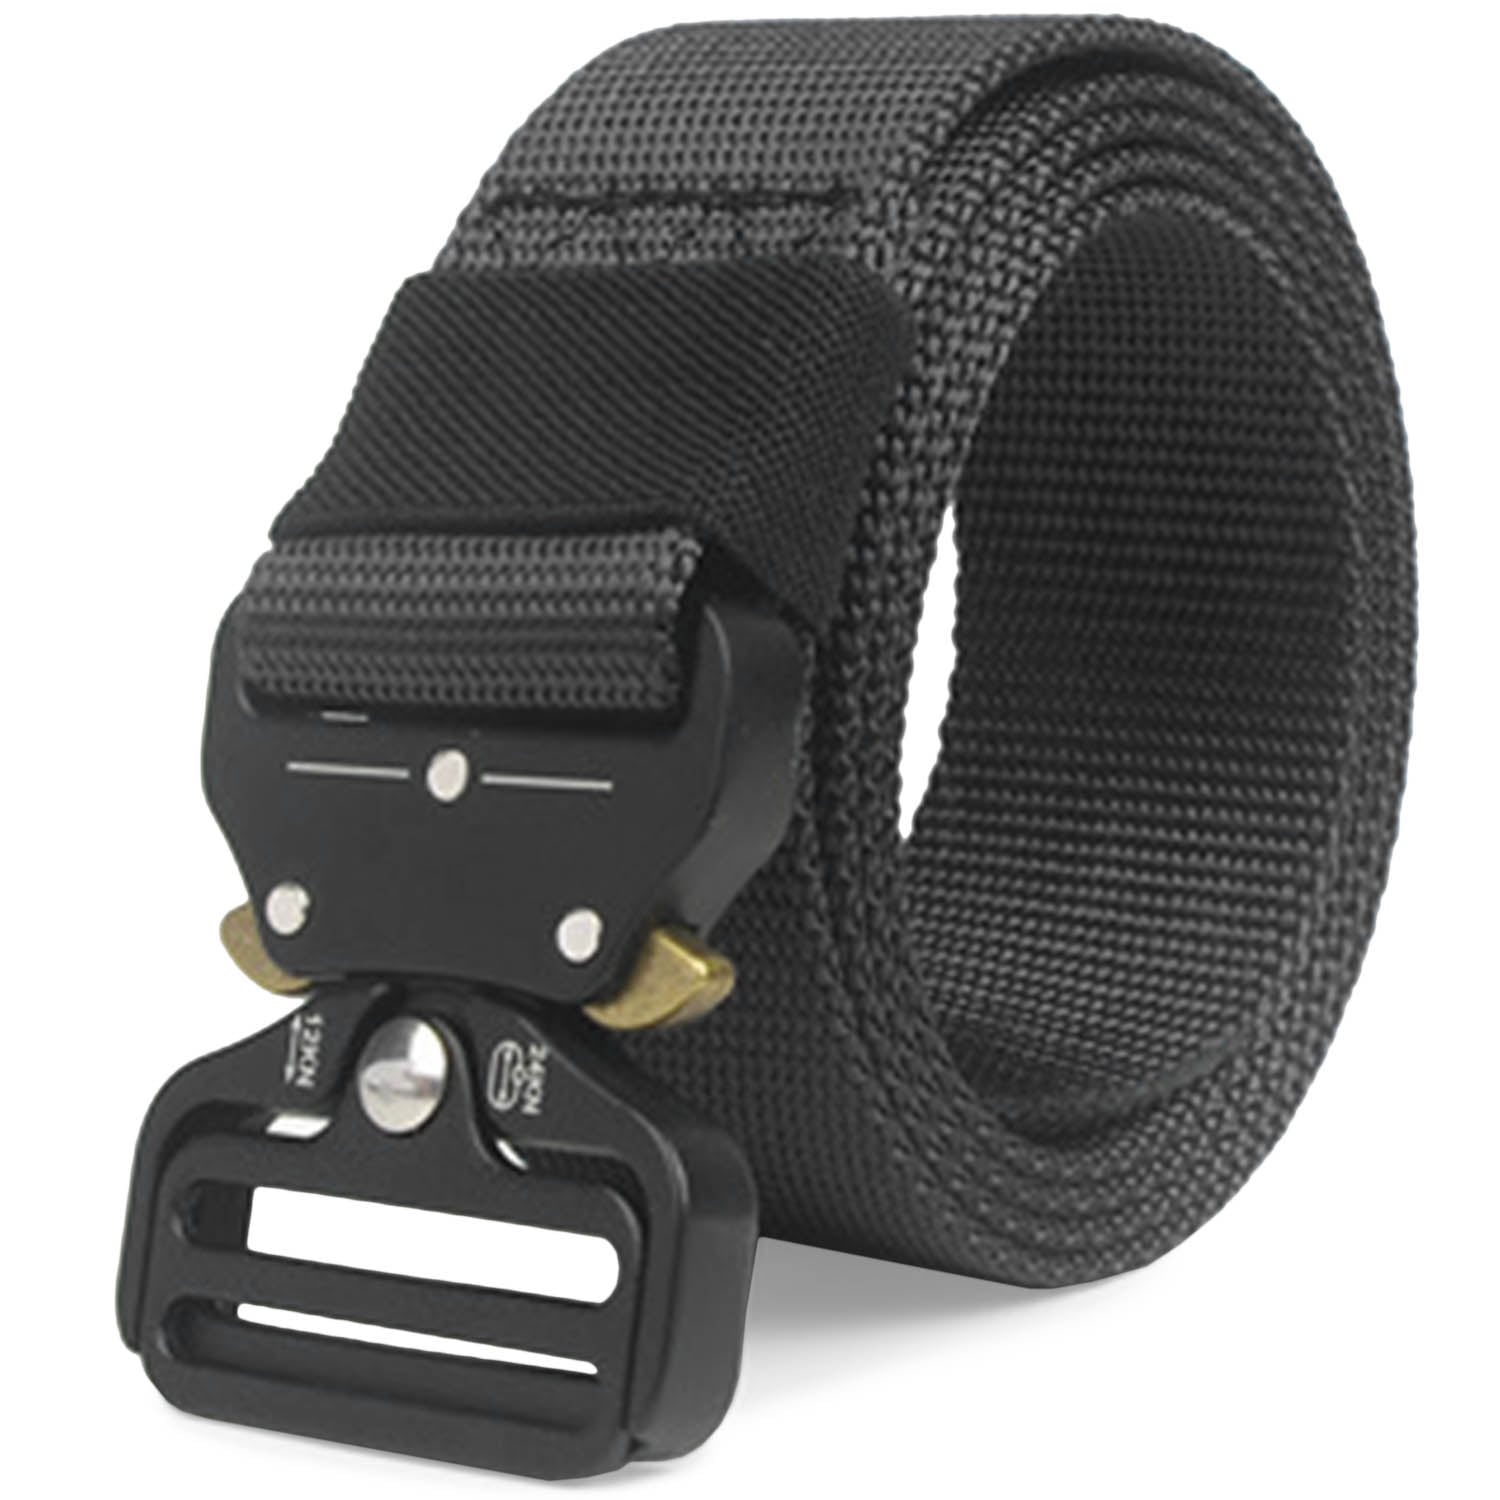 Military Tactical Belt Quick Release Nylon Military Style Outdoor Training Belt with Metal Buckle 7 Colors Optional